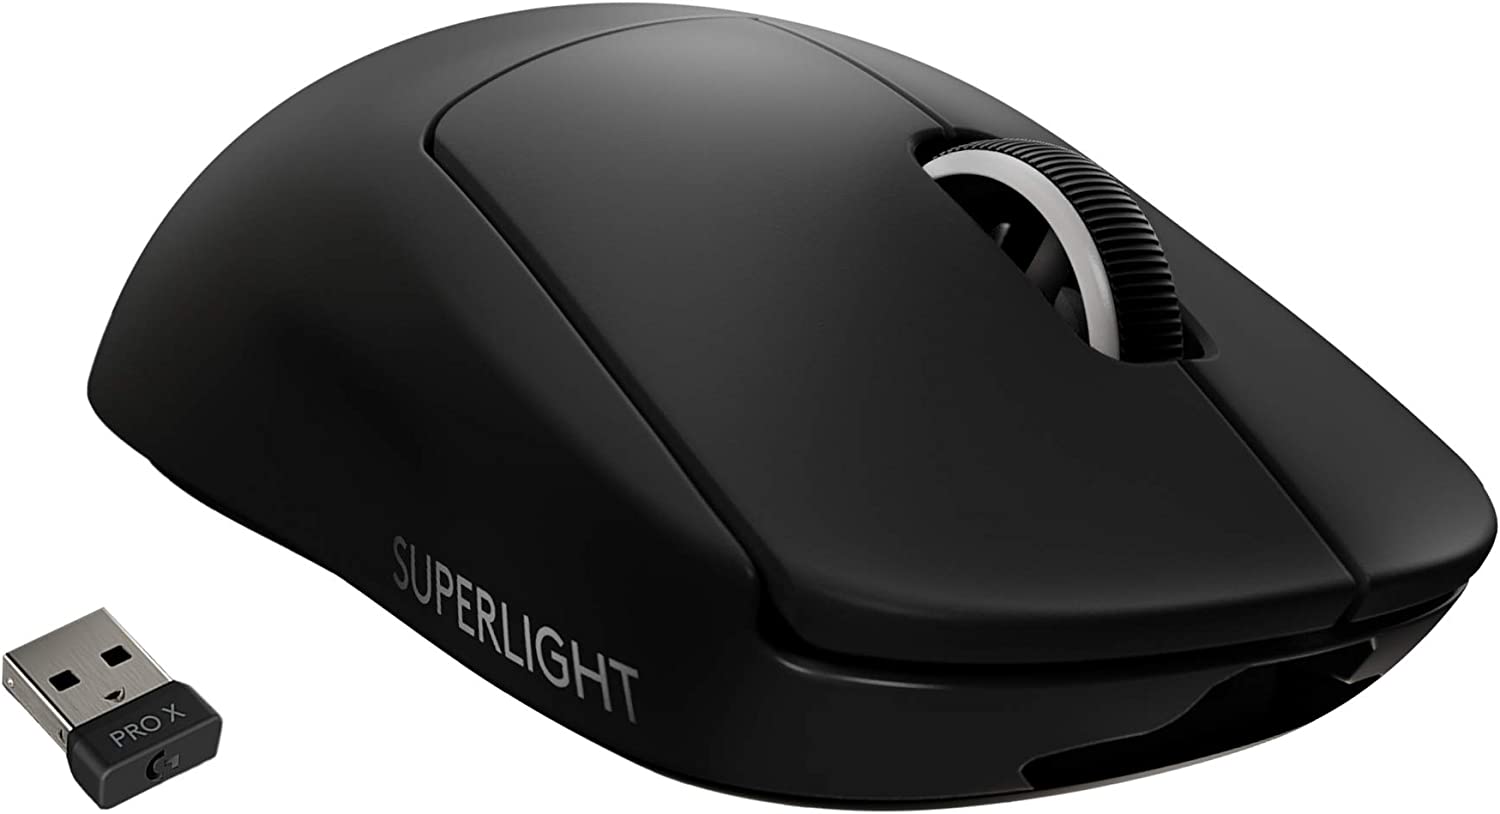 The Best Gaming Mouse: A Comprehensive Product Review